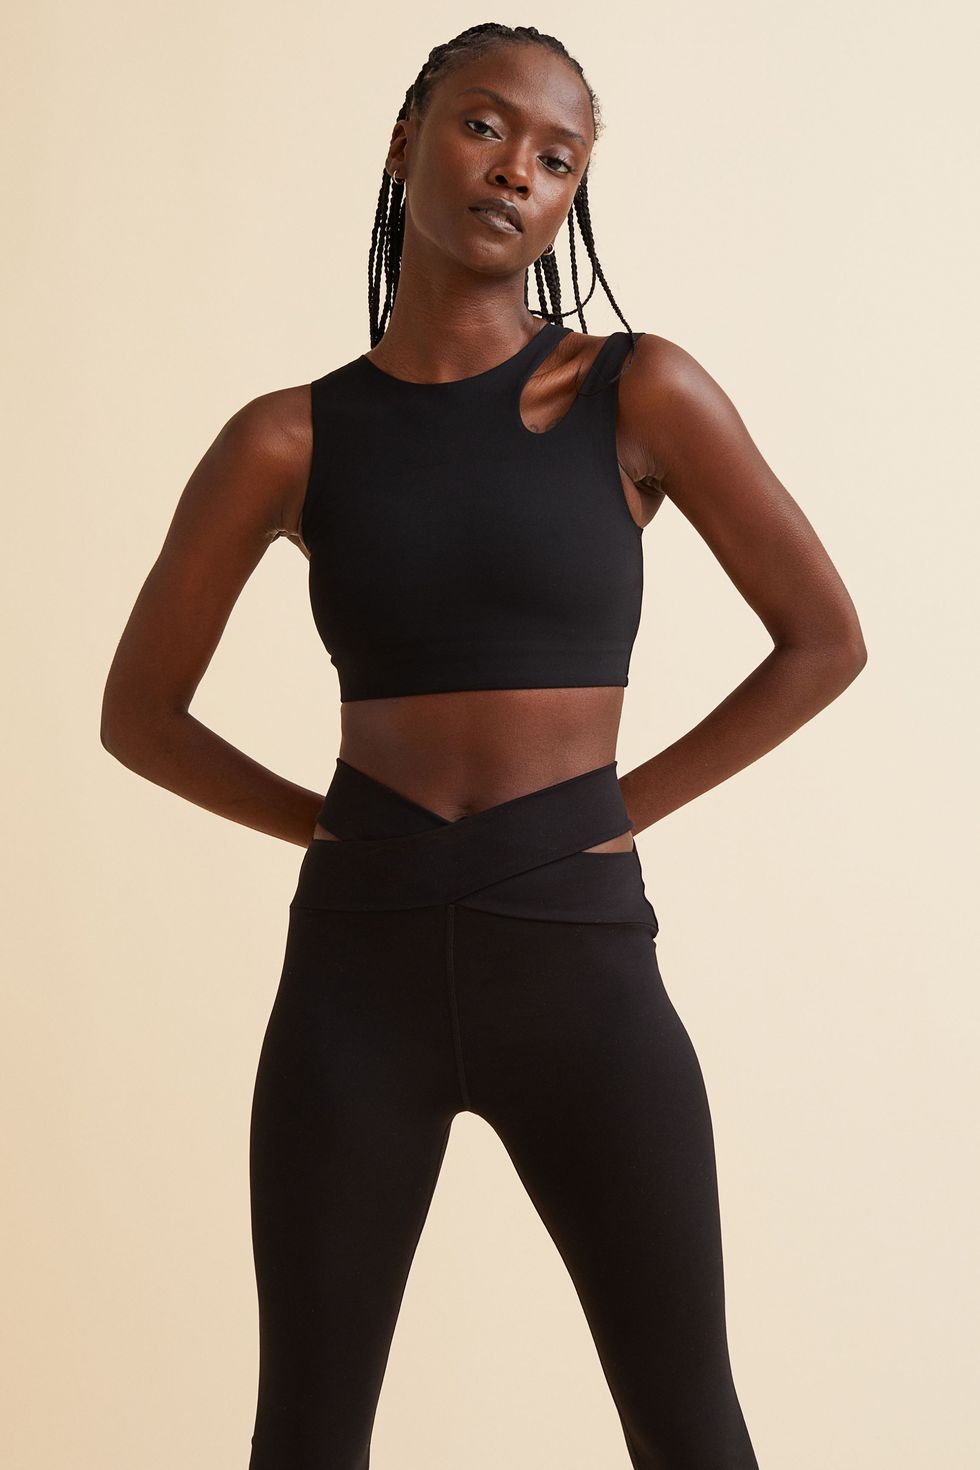 H&M Launches Move ﻿Activewear Collection - PureWow